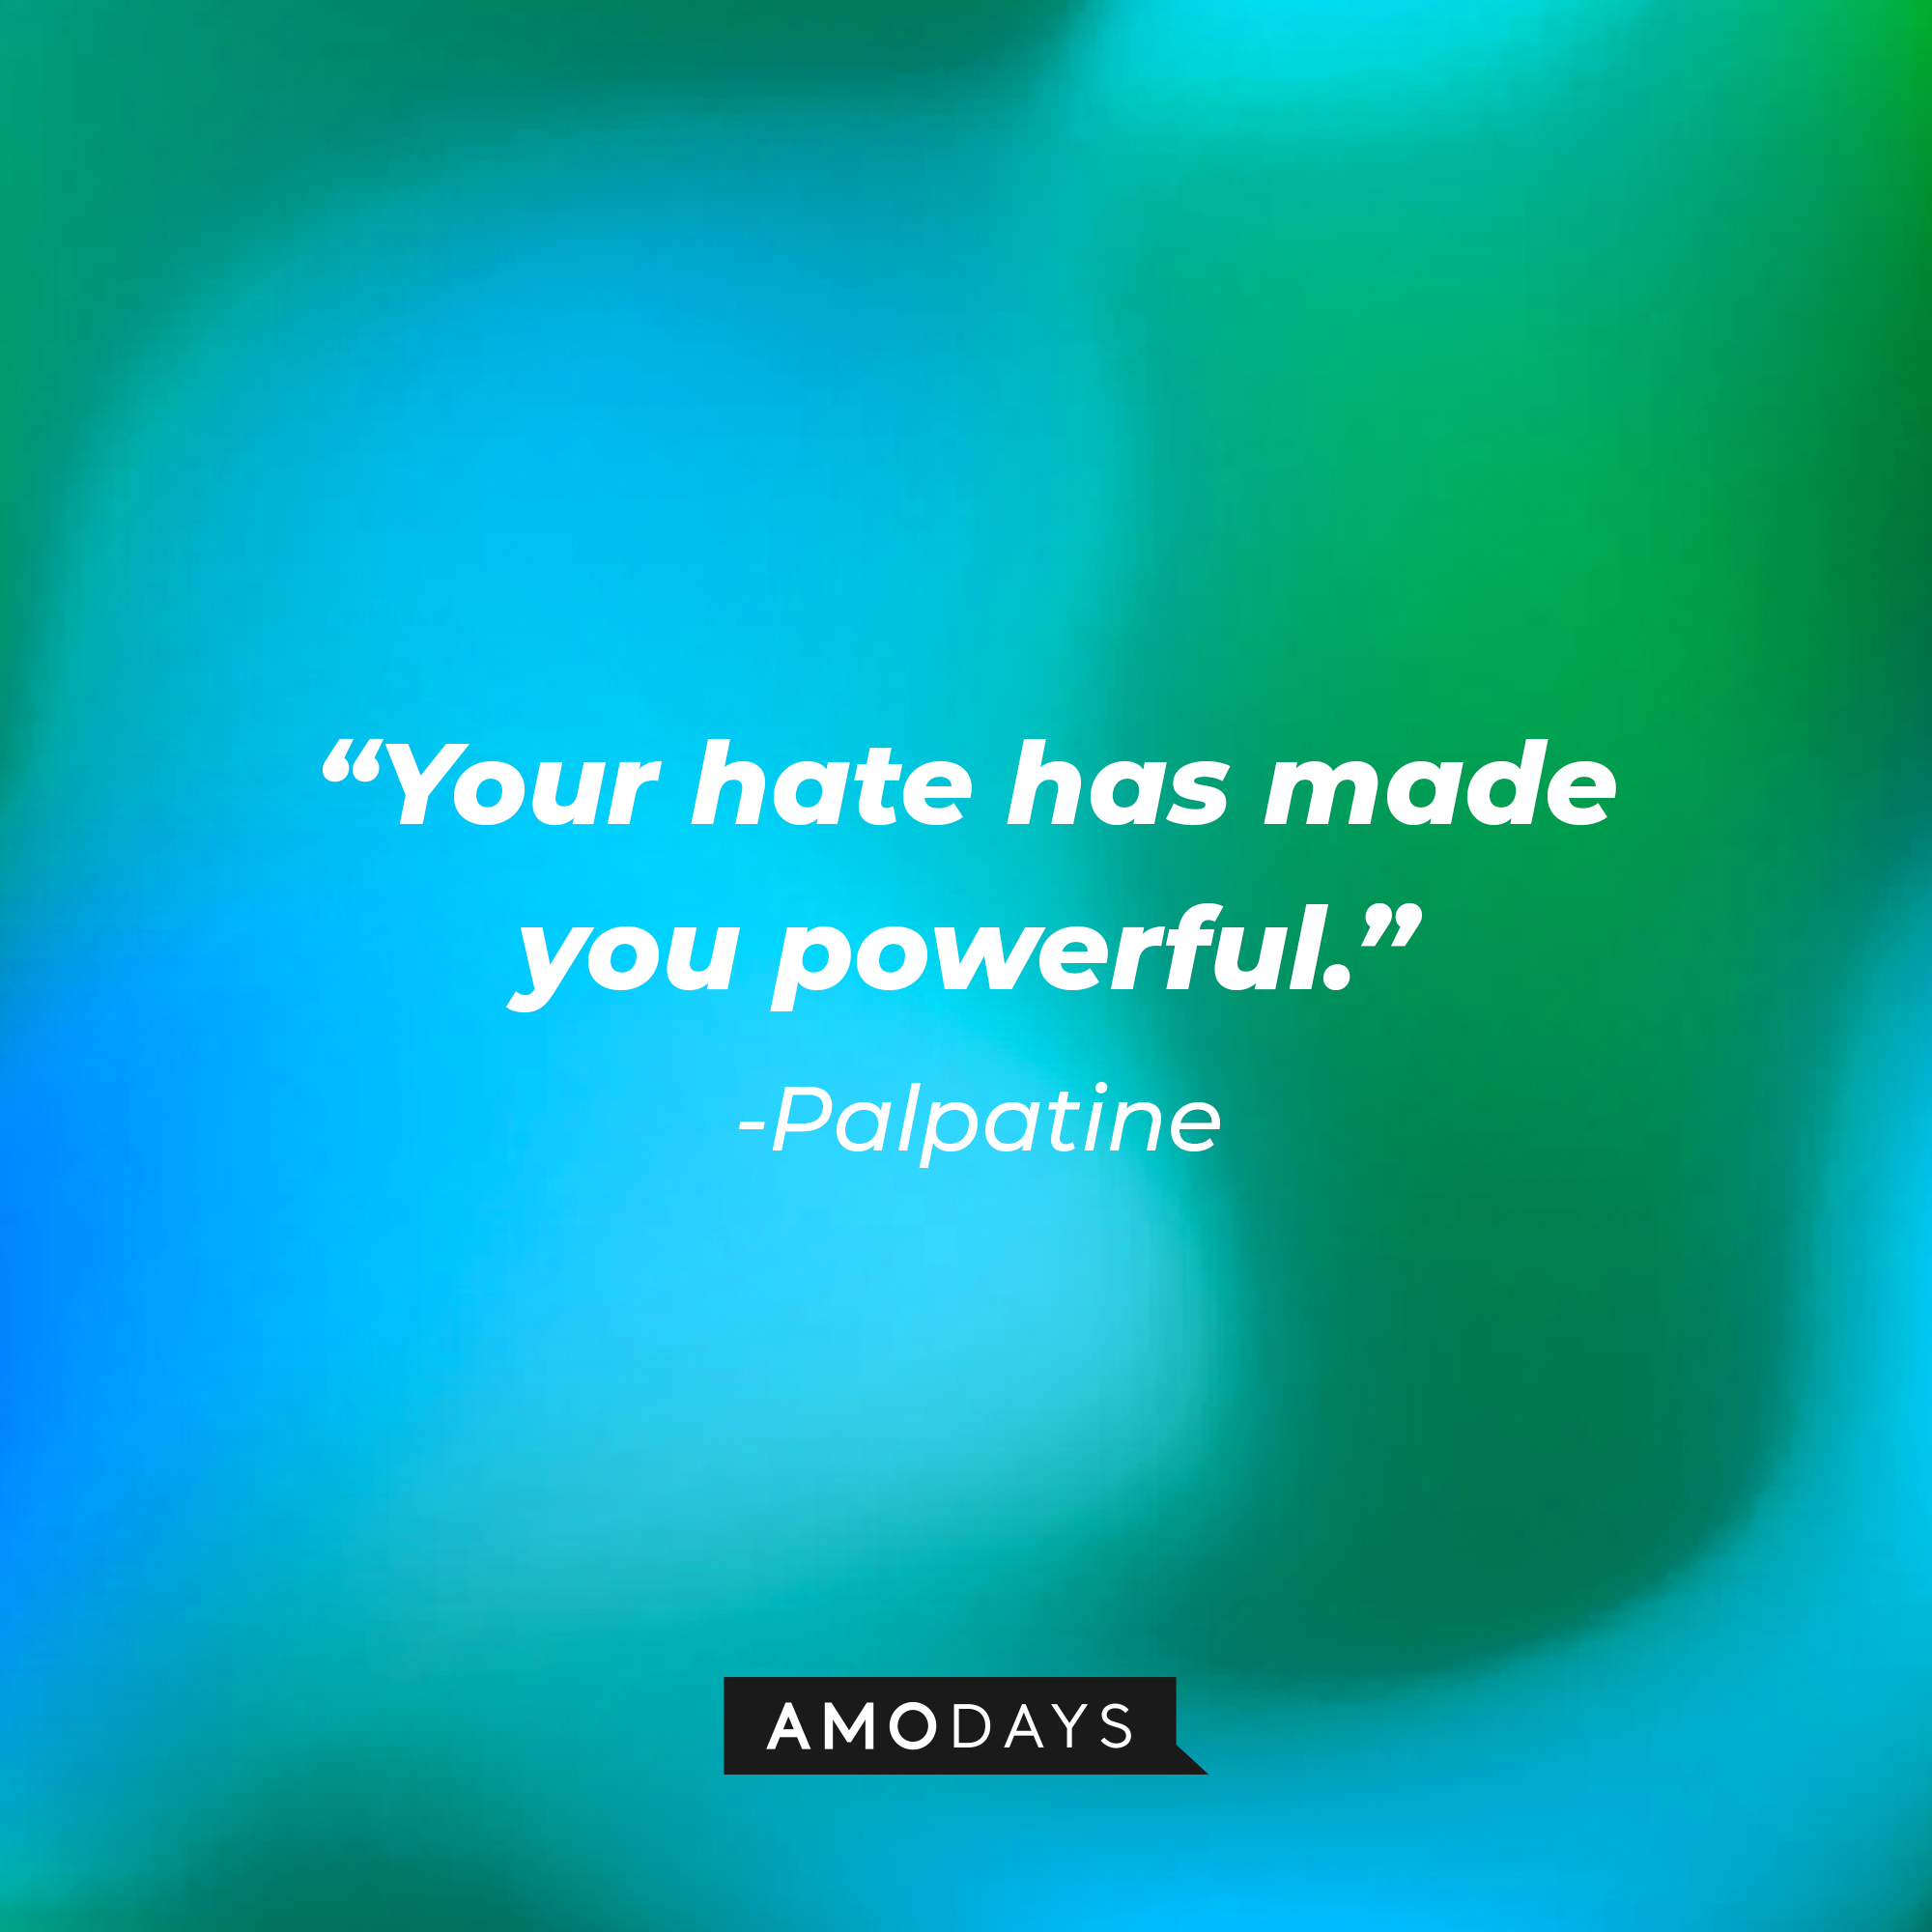 Palpatine’s quote: “Your hate has made you powerful.” | Source: AmoDays